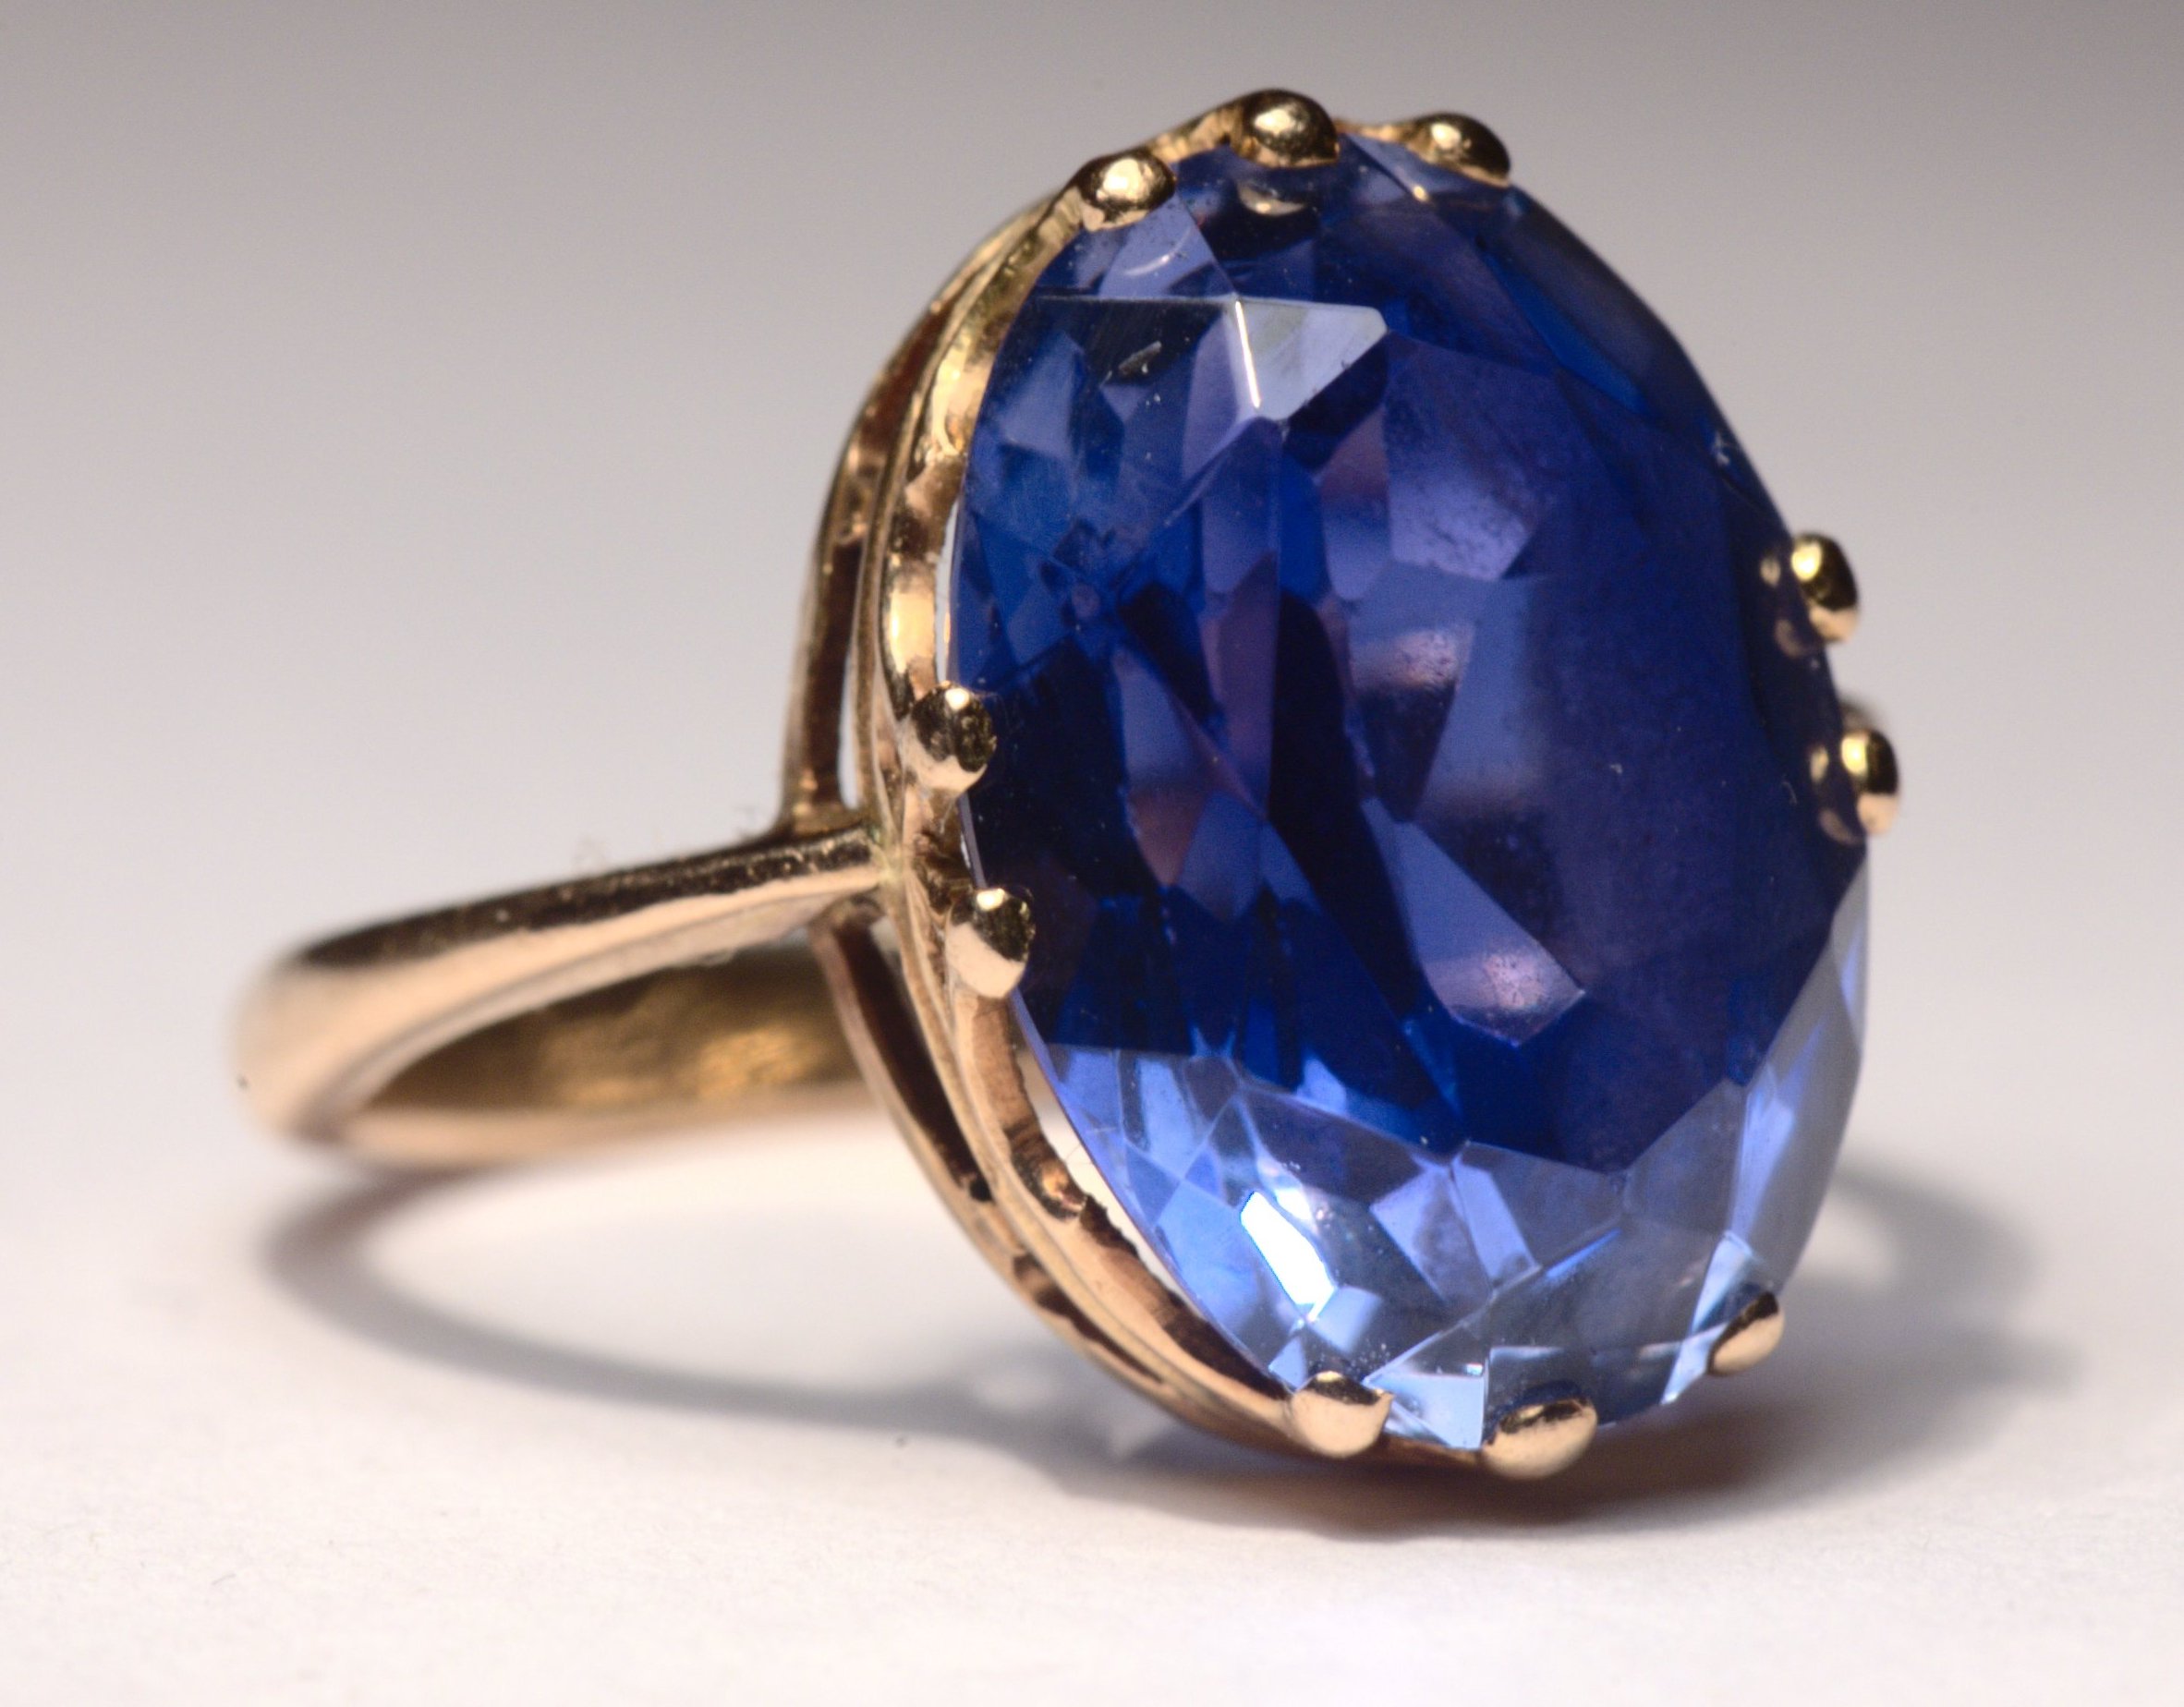 3. Unearth the Exquisite Beauty and Symbolism of Alexandrite